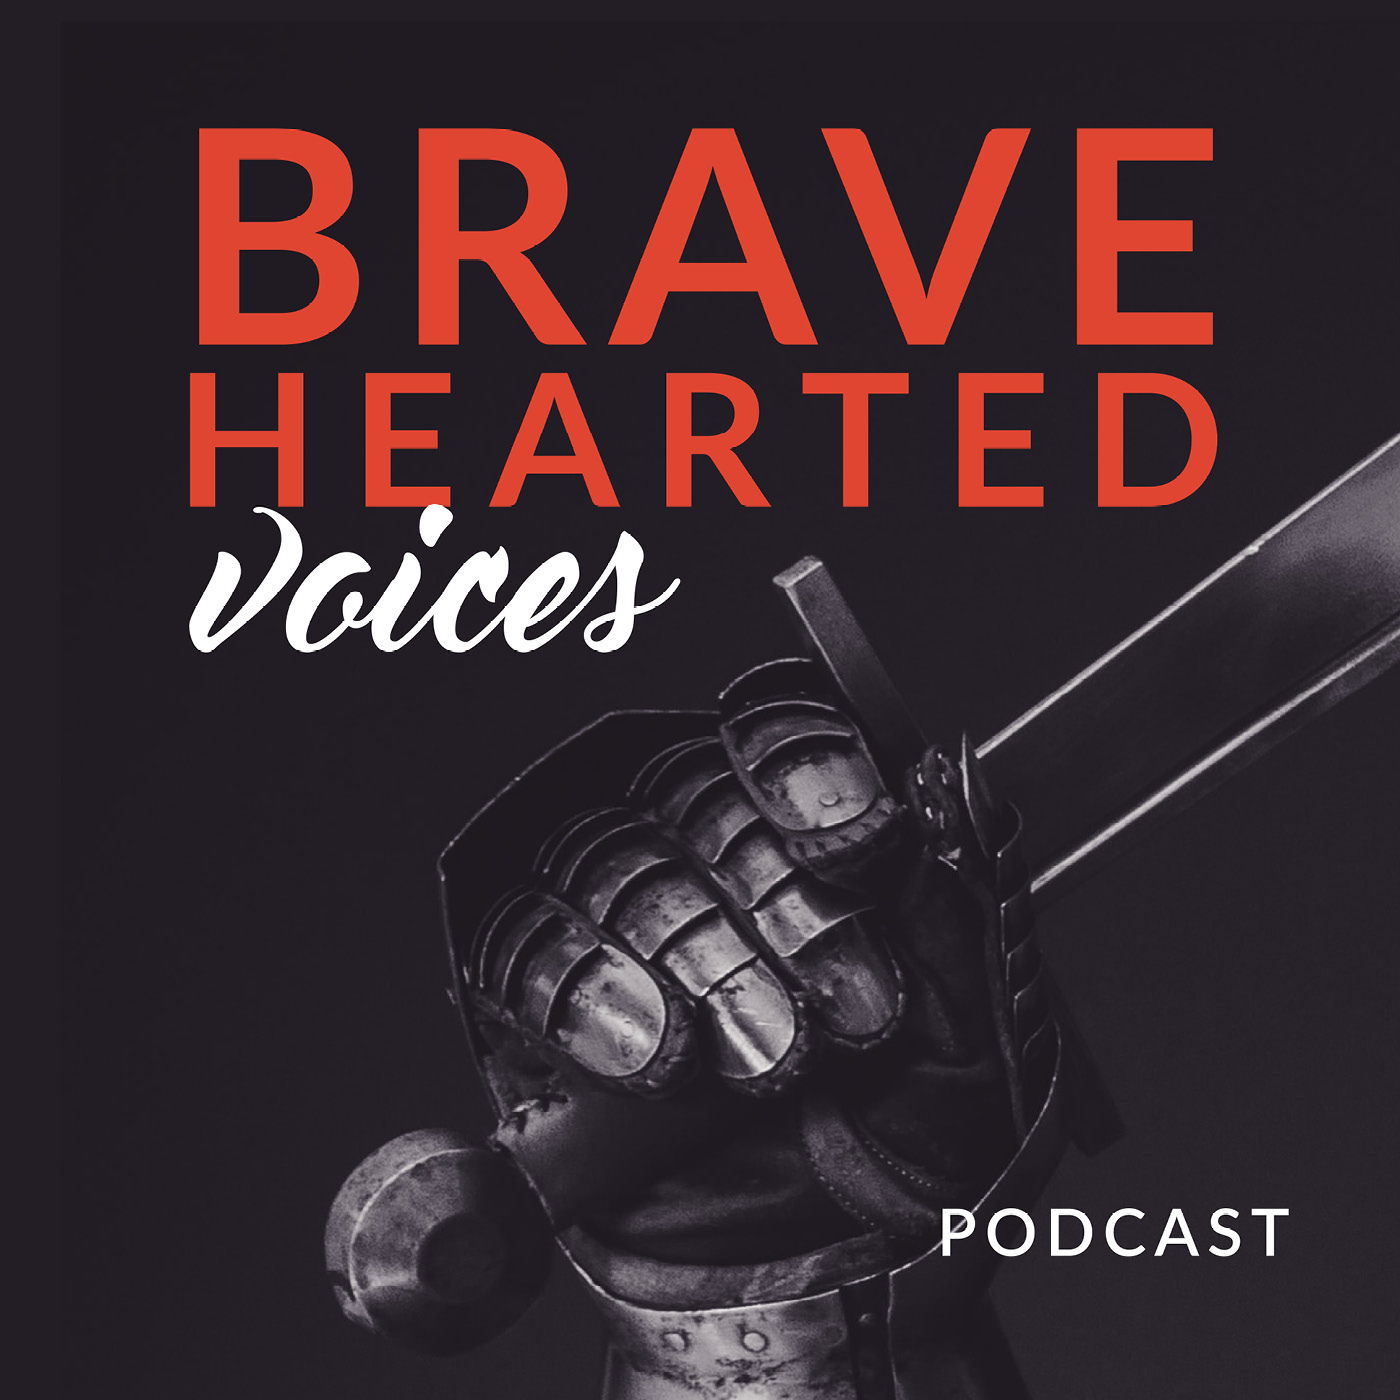 Bravehearted Voices Podcast